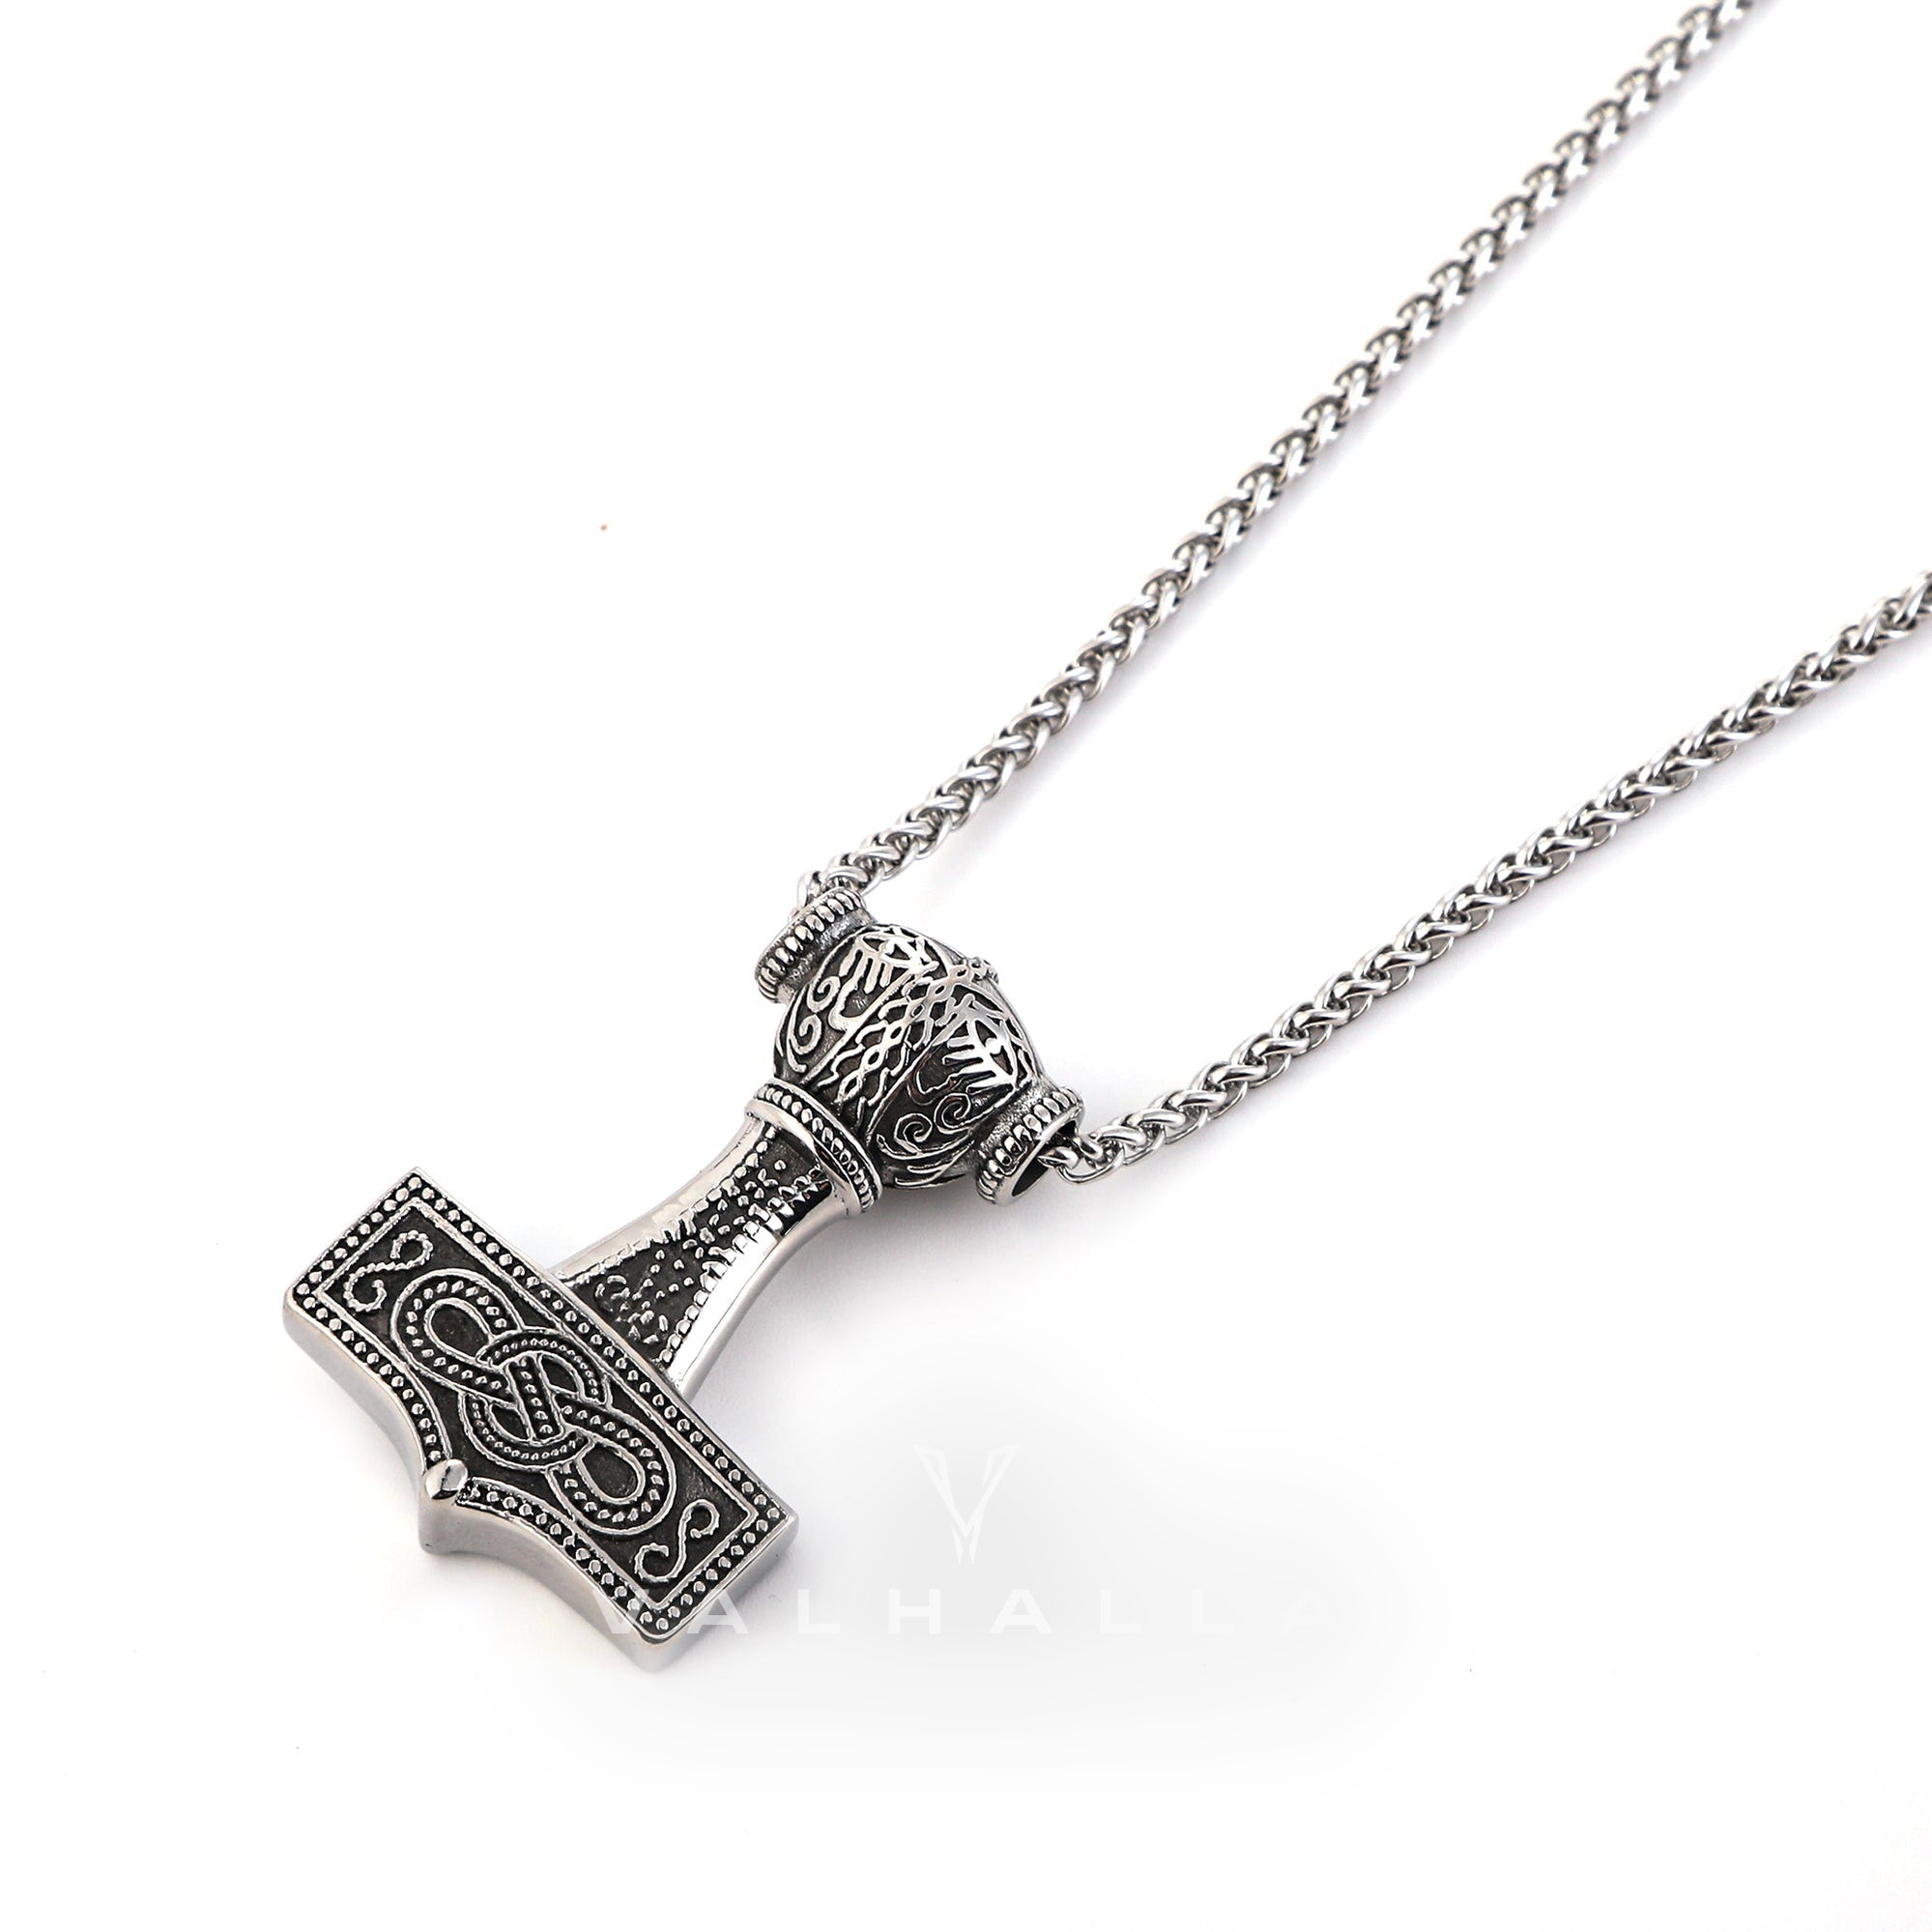 Handcrafted Stainless Steel Chunky Mjolnir Necklace With Celtic Scrolls